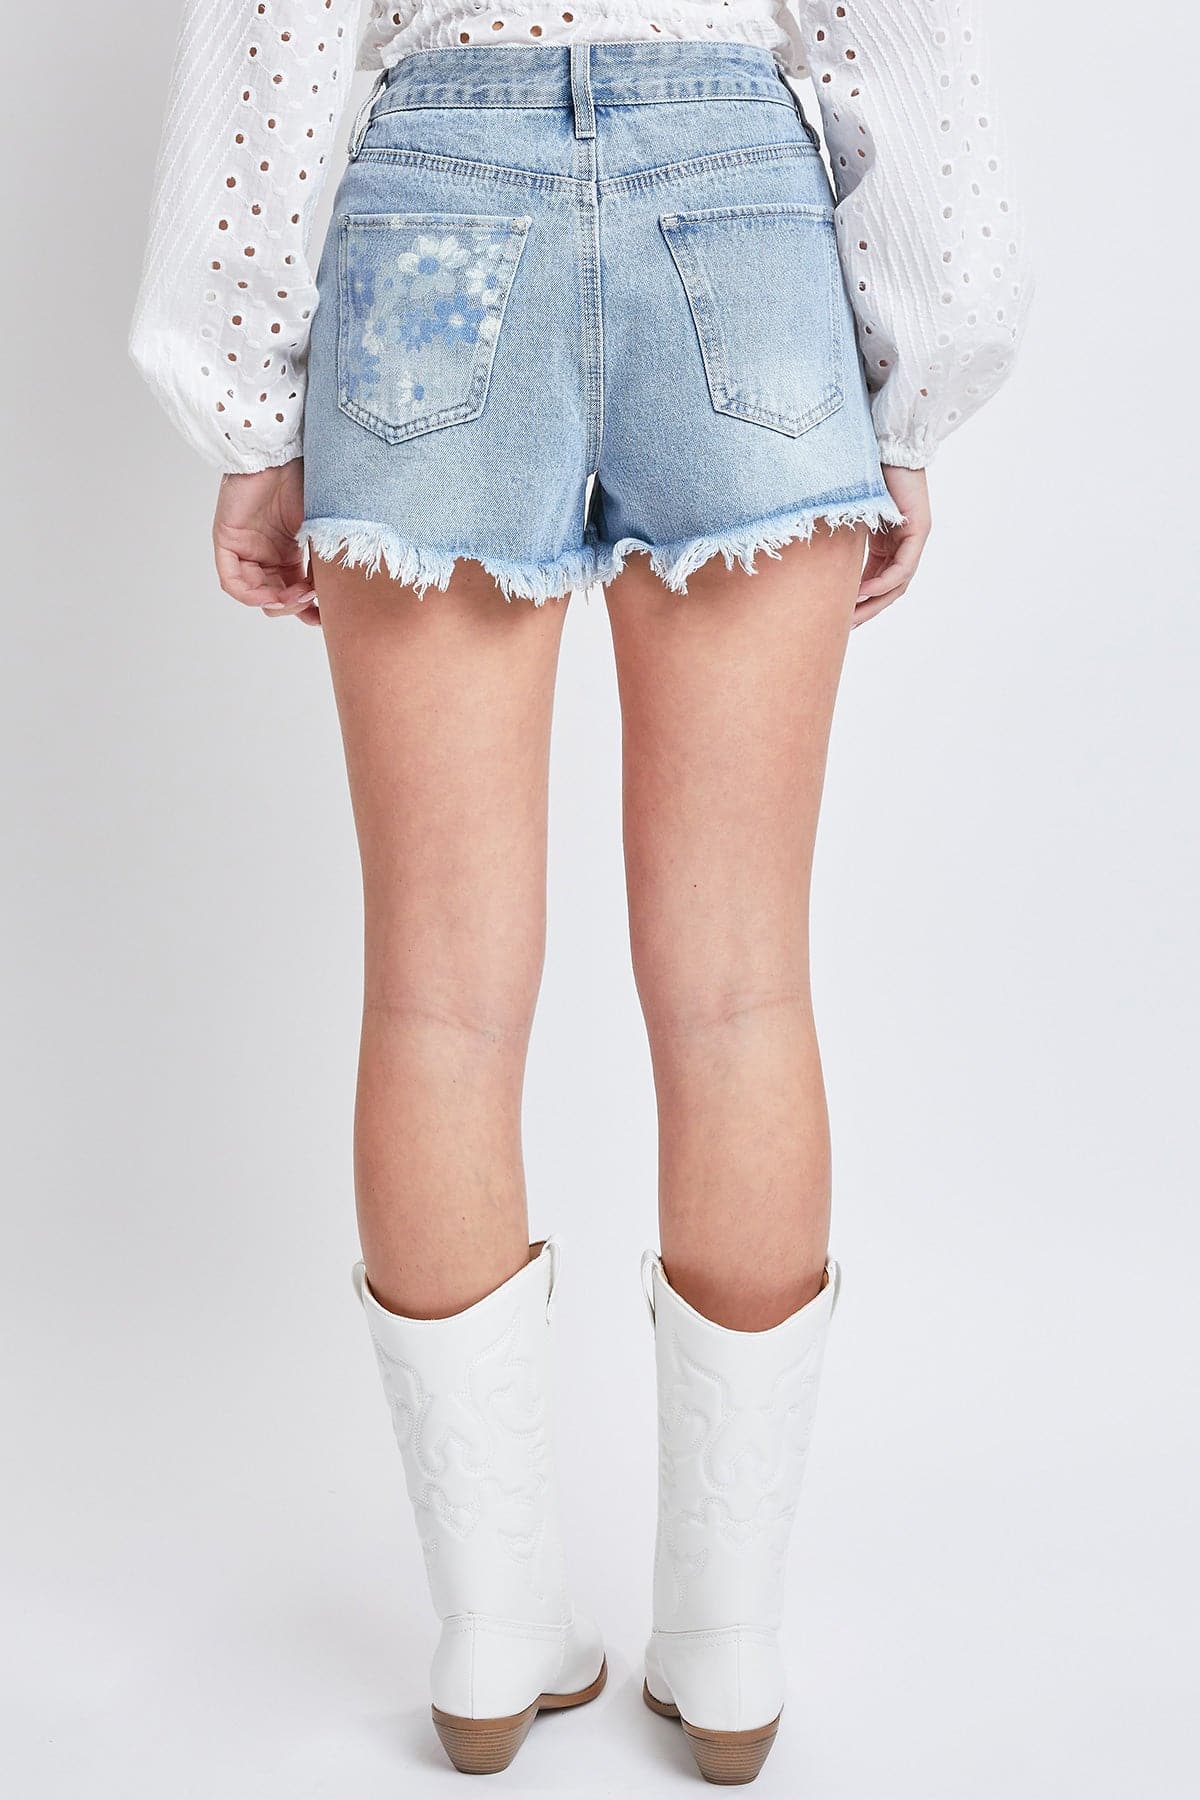 Women's High-Rise Denim Shorts with Floral Print